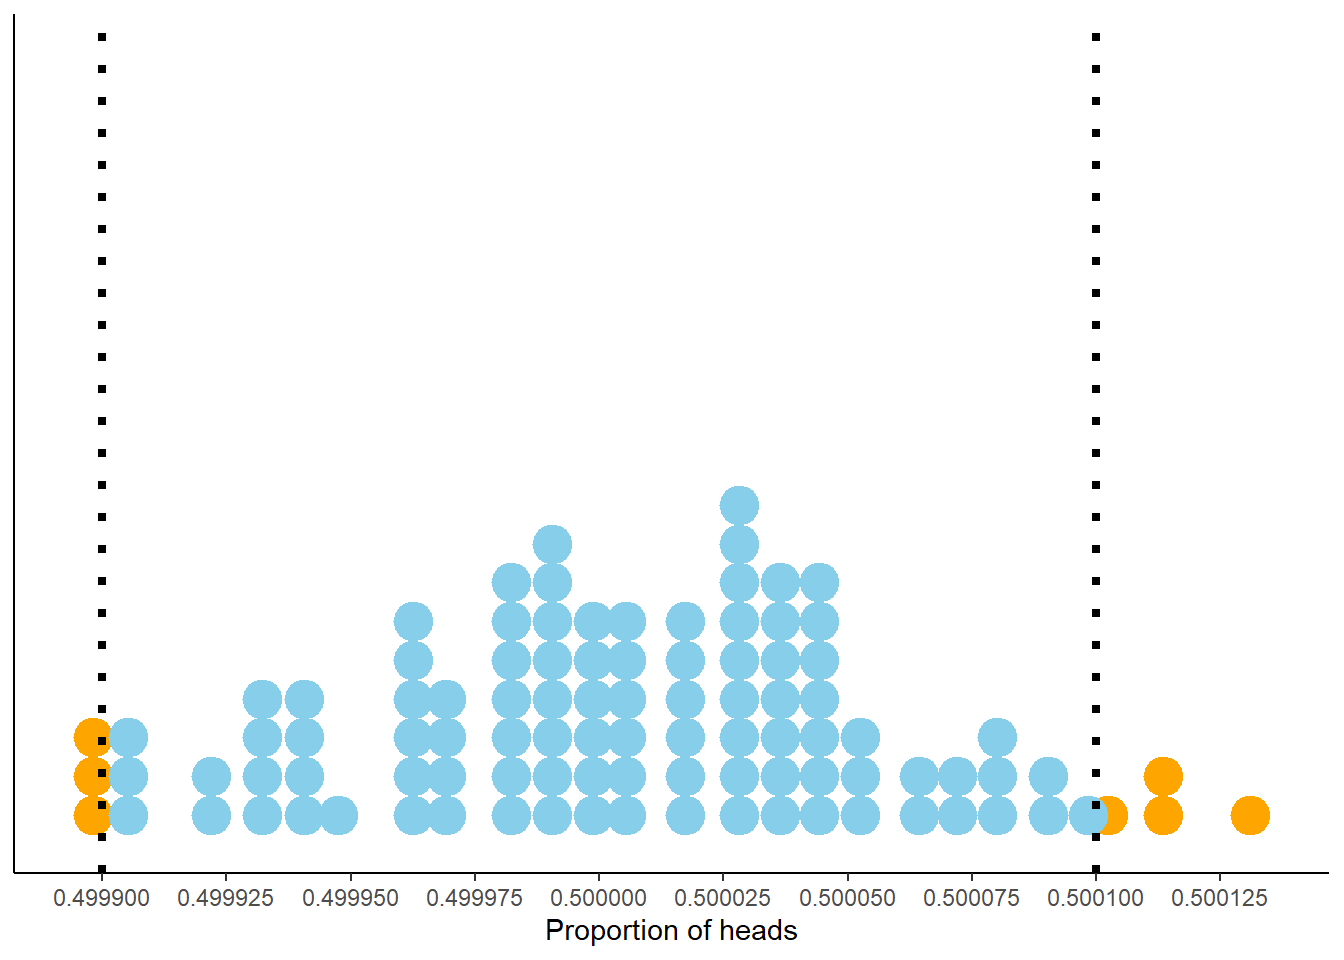 Proportion of flips which are heads in 100 sets of 100,000,000 fair coin flips. Each dot represents a set of 100,000,000 fair coin flips. In 93 of these 100 sets the proportion of heads is between 0.4999 and 0.5001 (the blue dots).